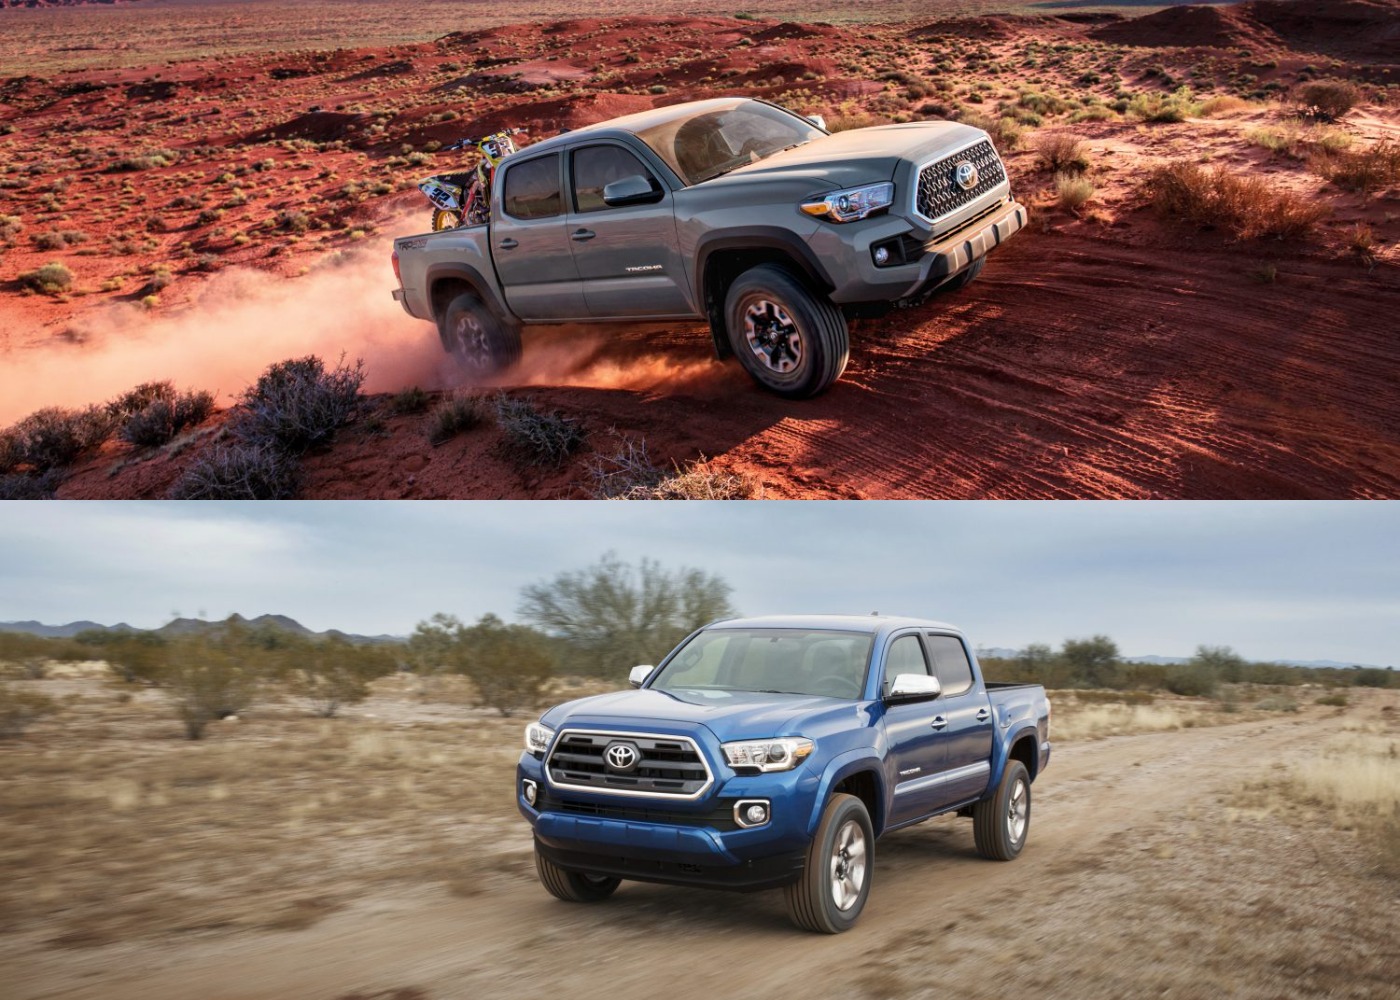 The best used Toyota Tacoma pickup truck years